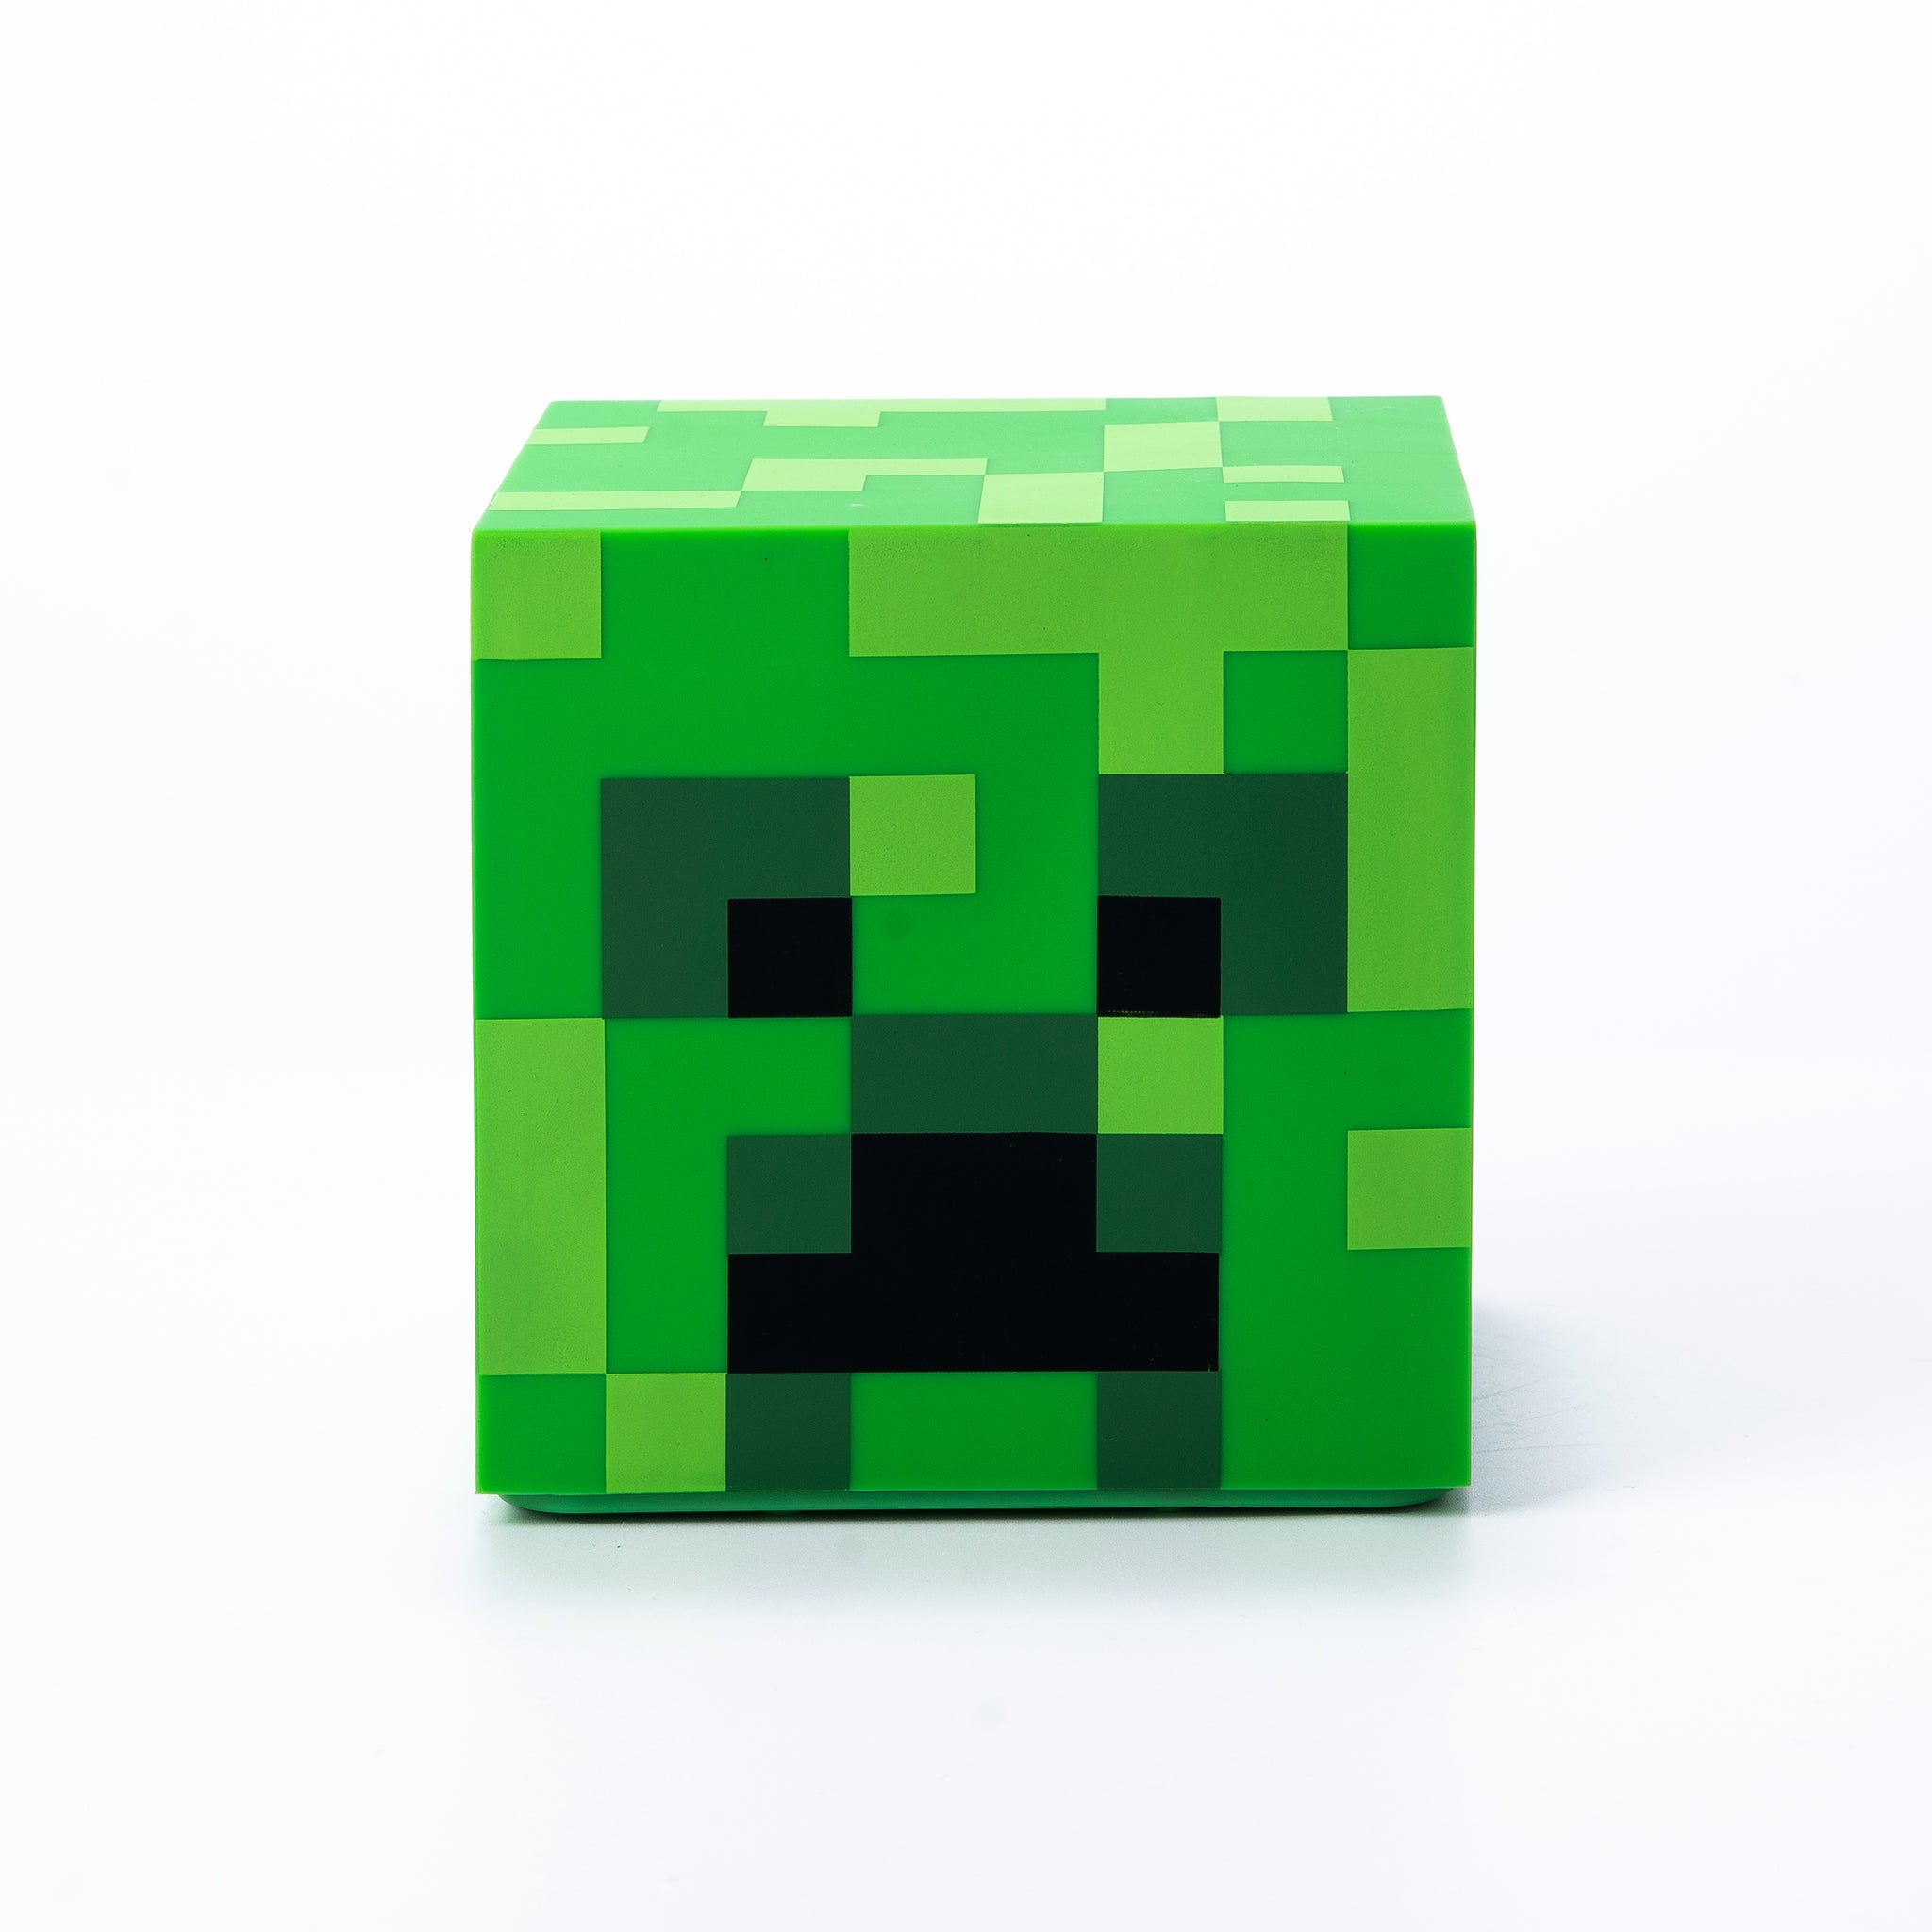 Creeper - What is a creeper in Minecraft?